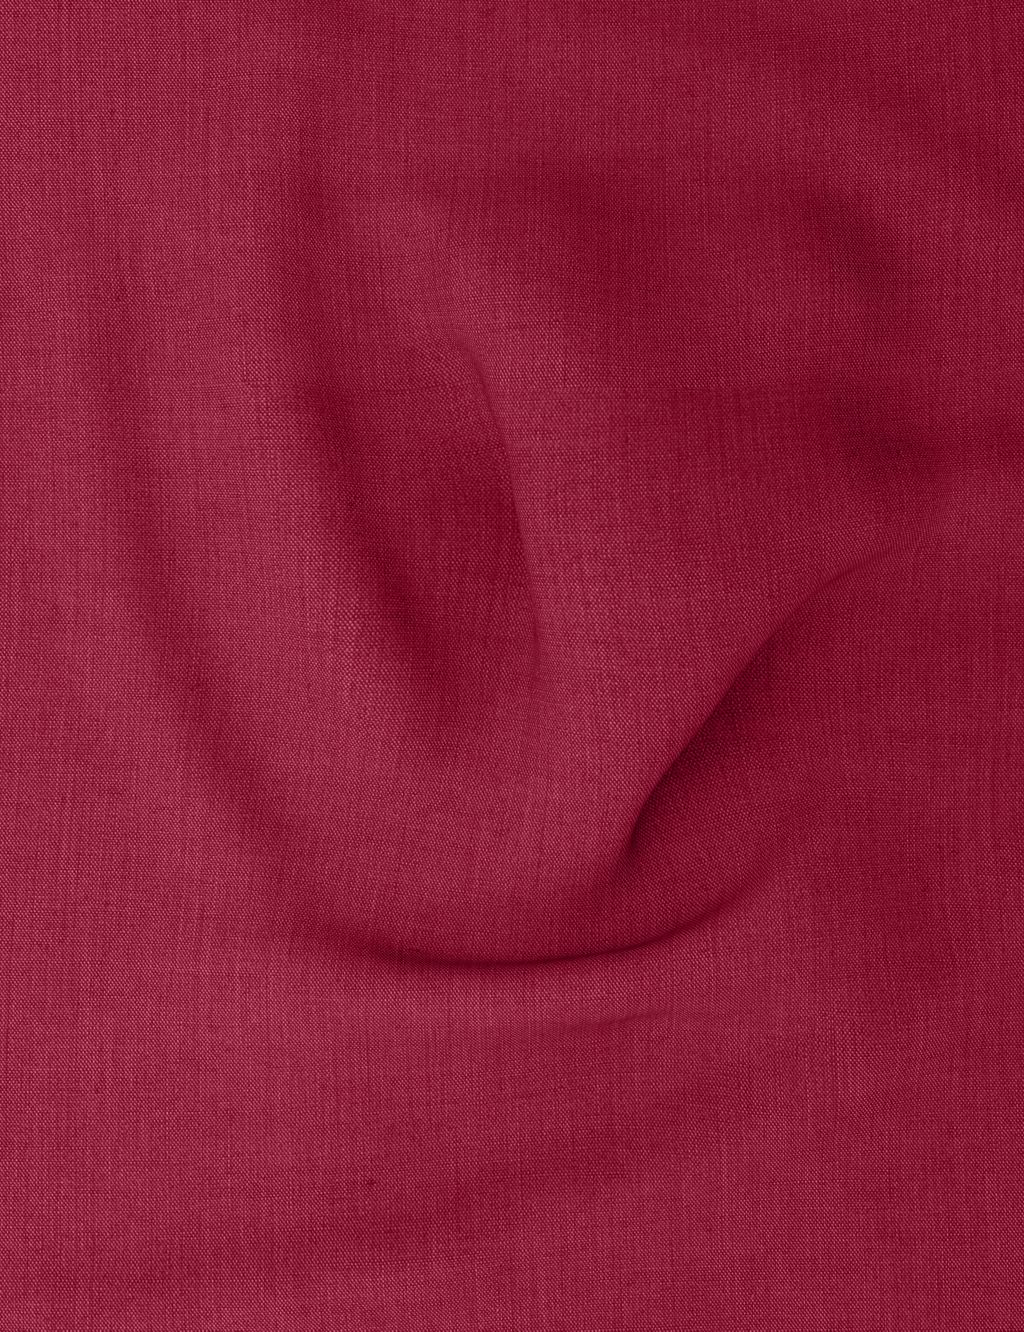 Cotton Rich Percale Deep Fitted Sheet image 2